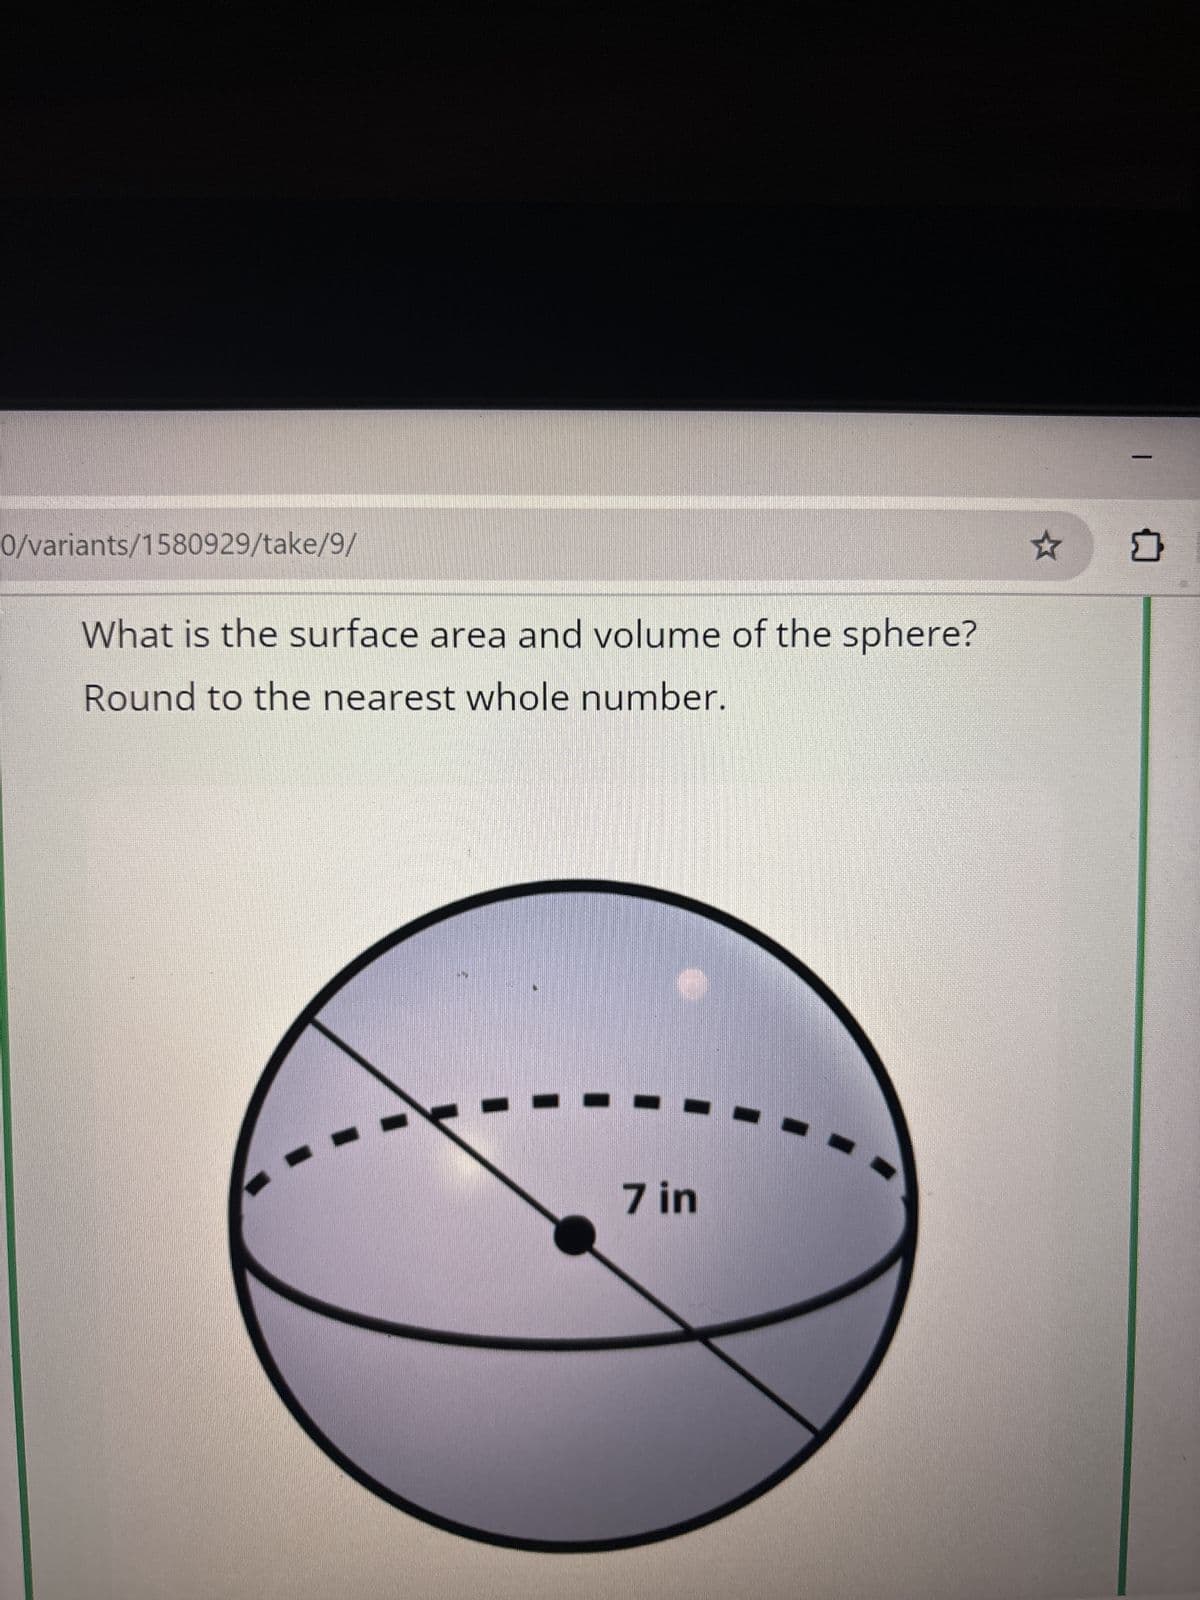 0/variants/1580929/take/9/
What is the surface area and volume of the sphere?
Round to the nearest whole number.
7 in
☆